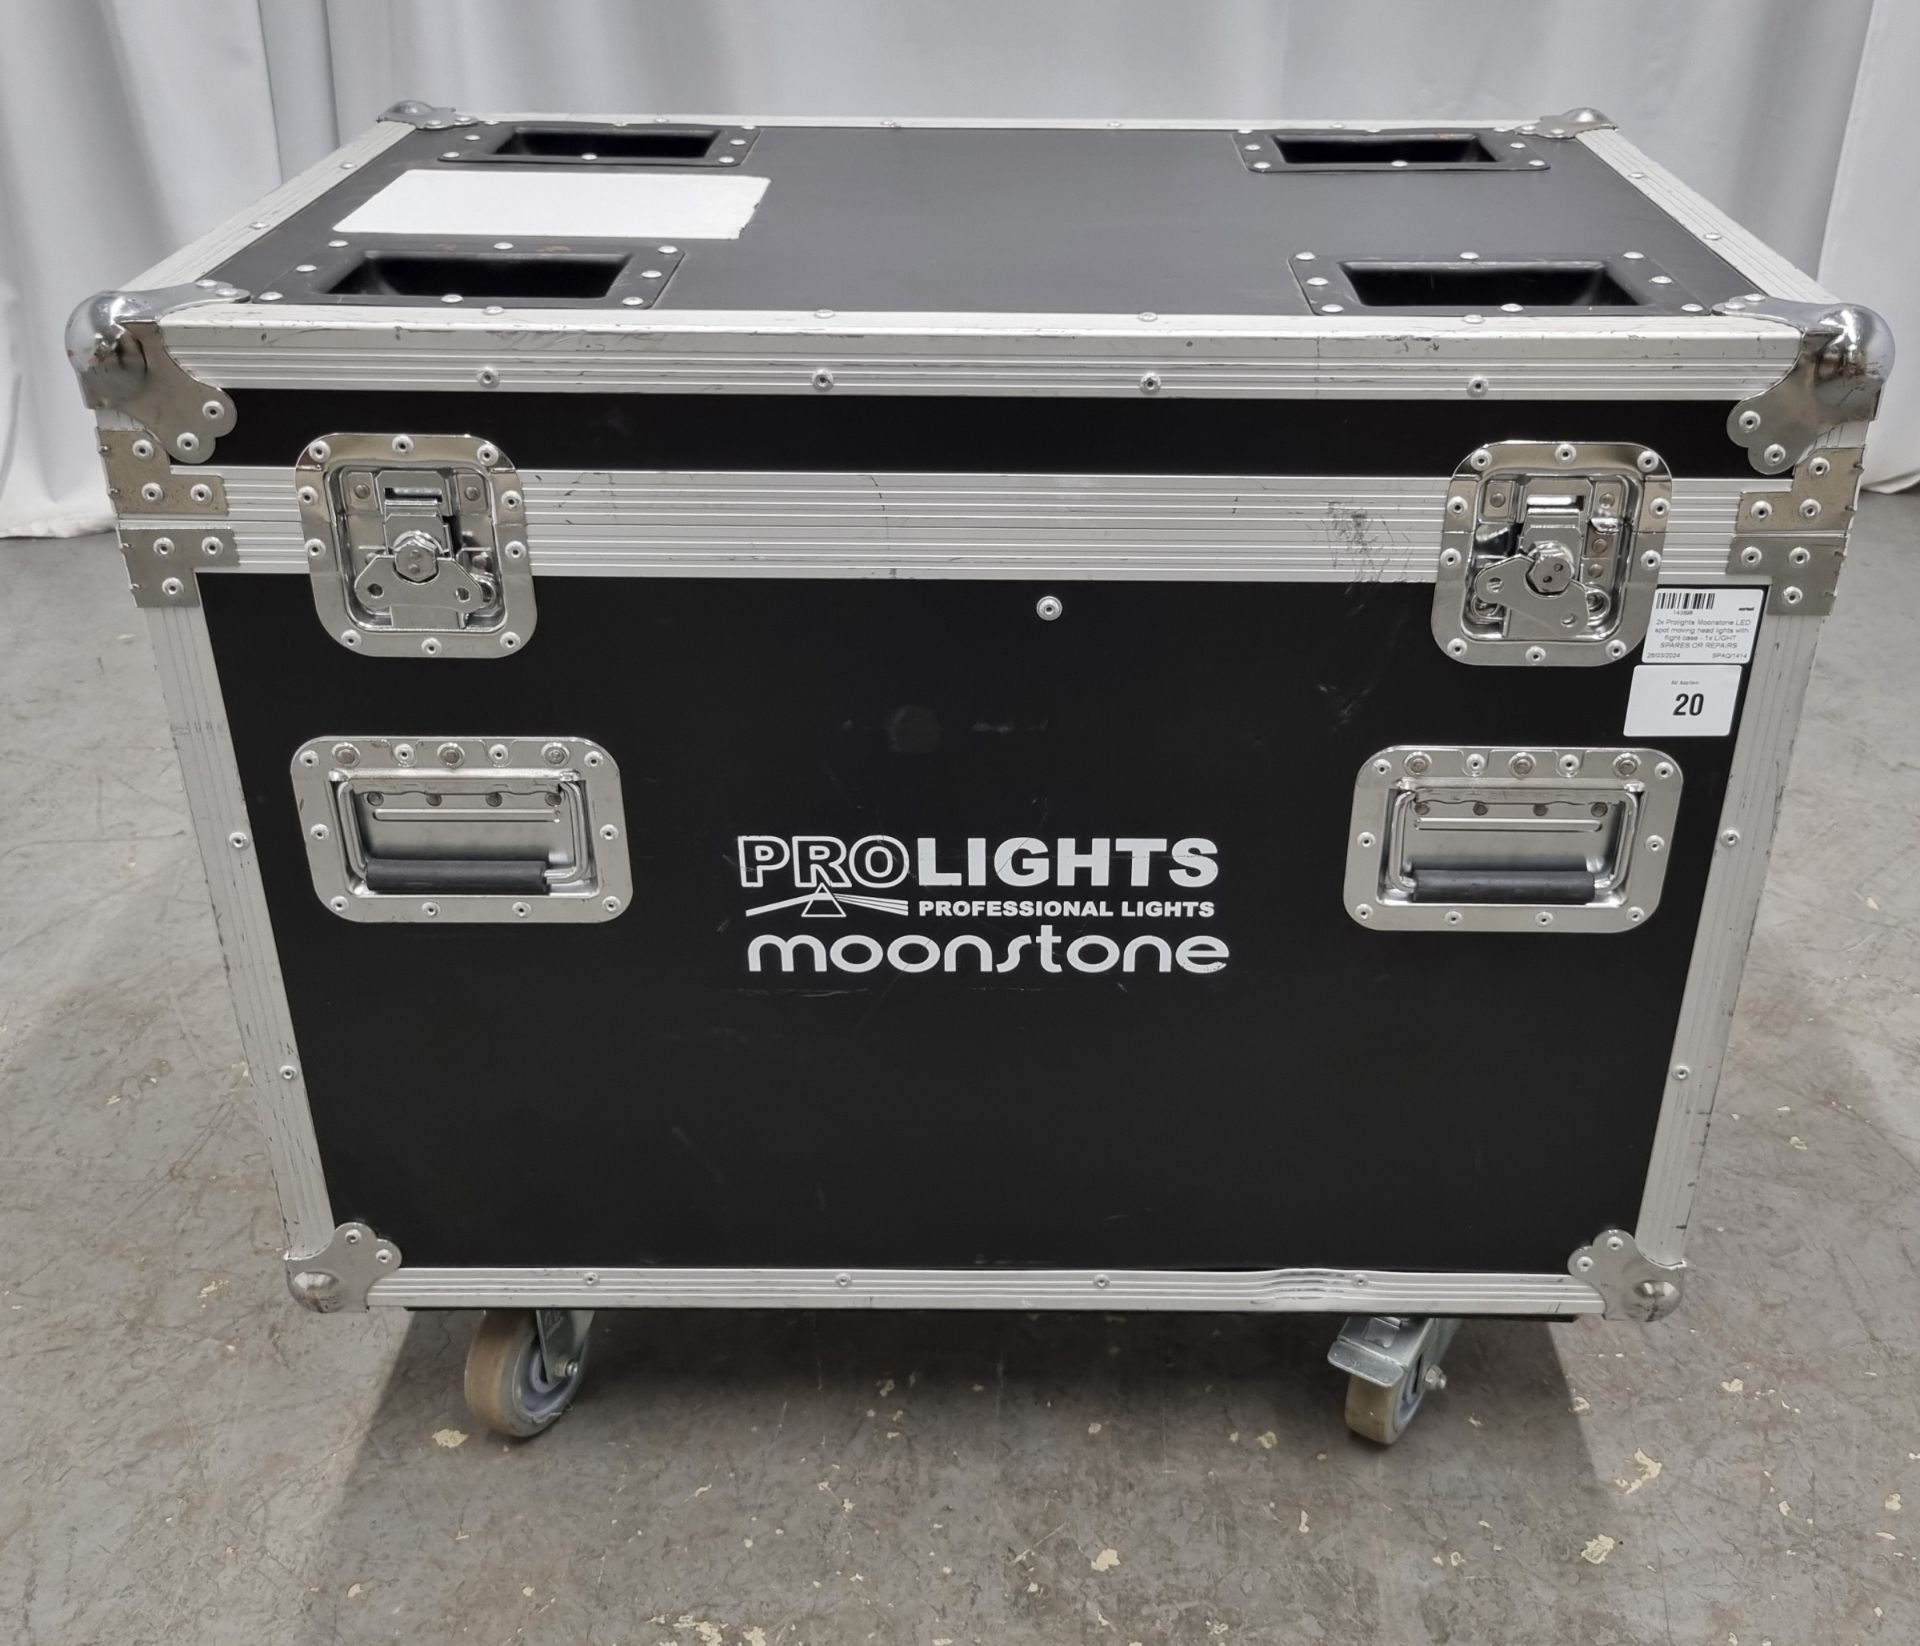 2x Prolights Moonstone LED spot moving head lights with flight case - 1x LIGHT SPARES OR REPAIRS - Image 12 of 14